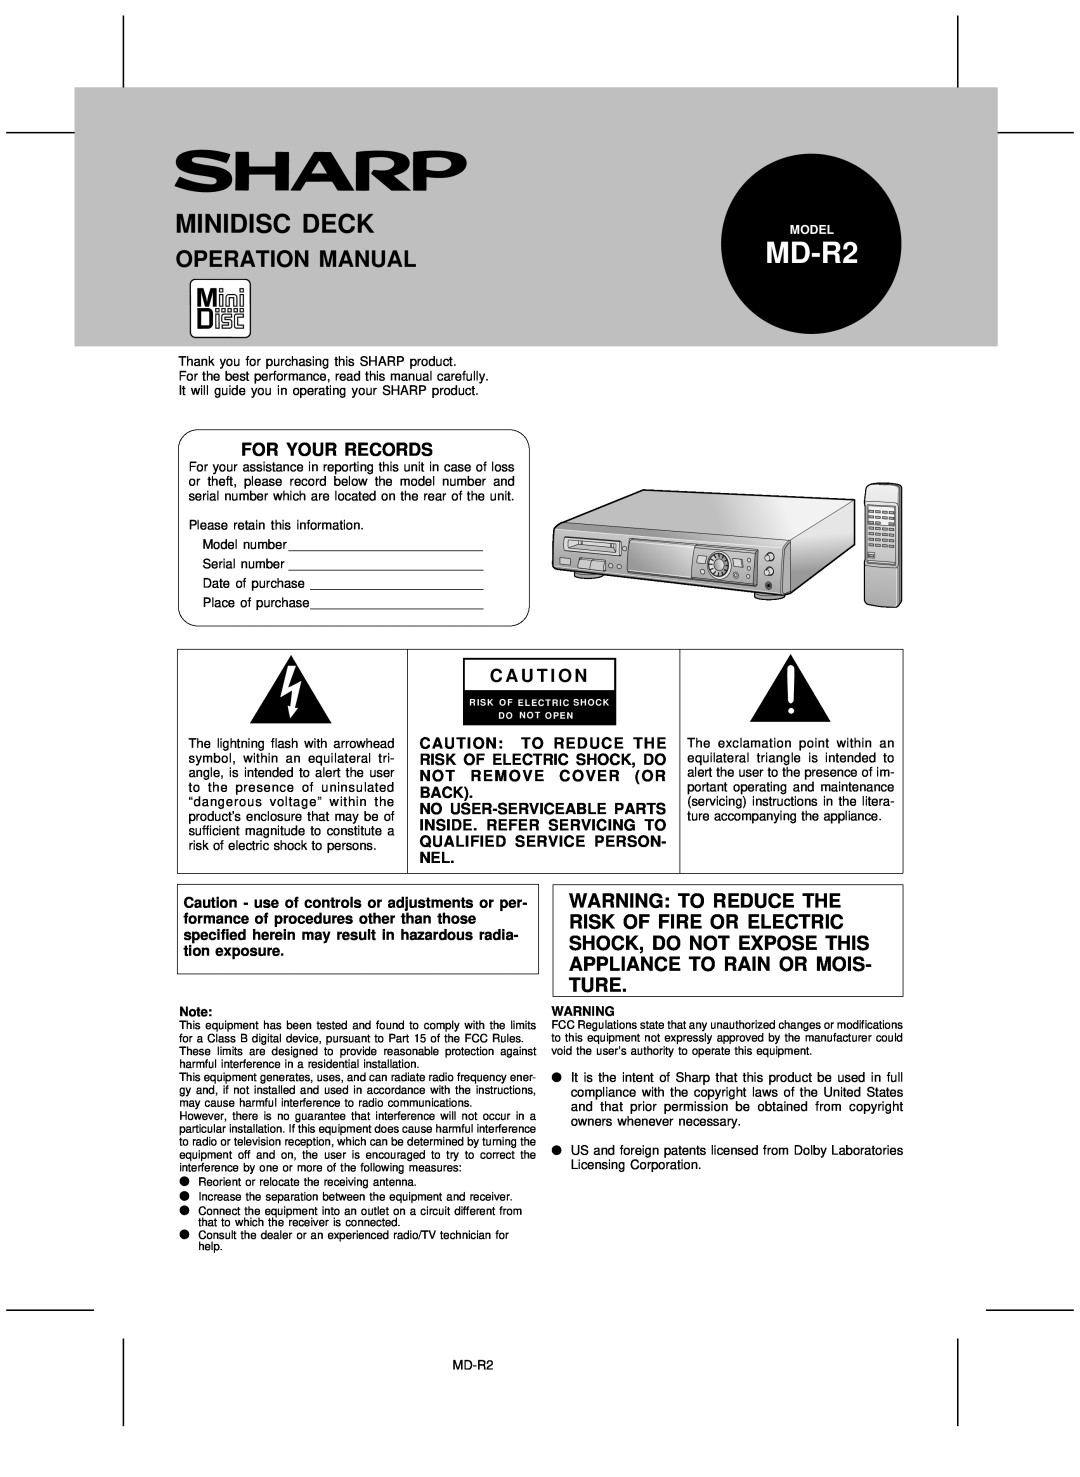 Kenwood MD-R2 operation manual Operation Manual, For Your Records, C A U T I O N, Minidisc Deck 